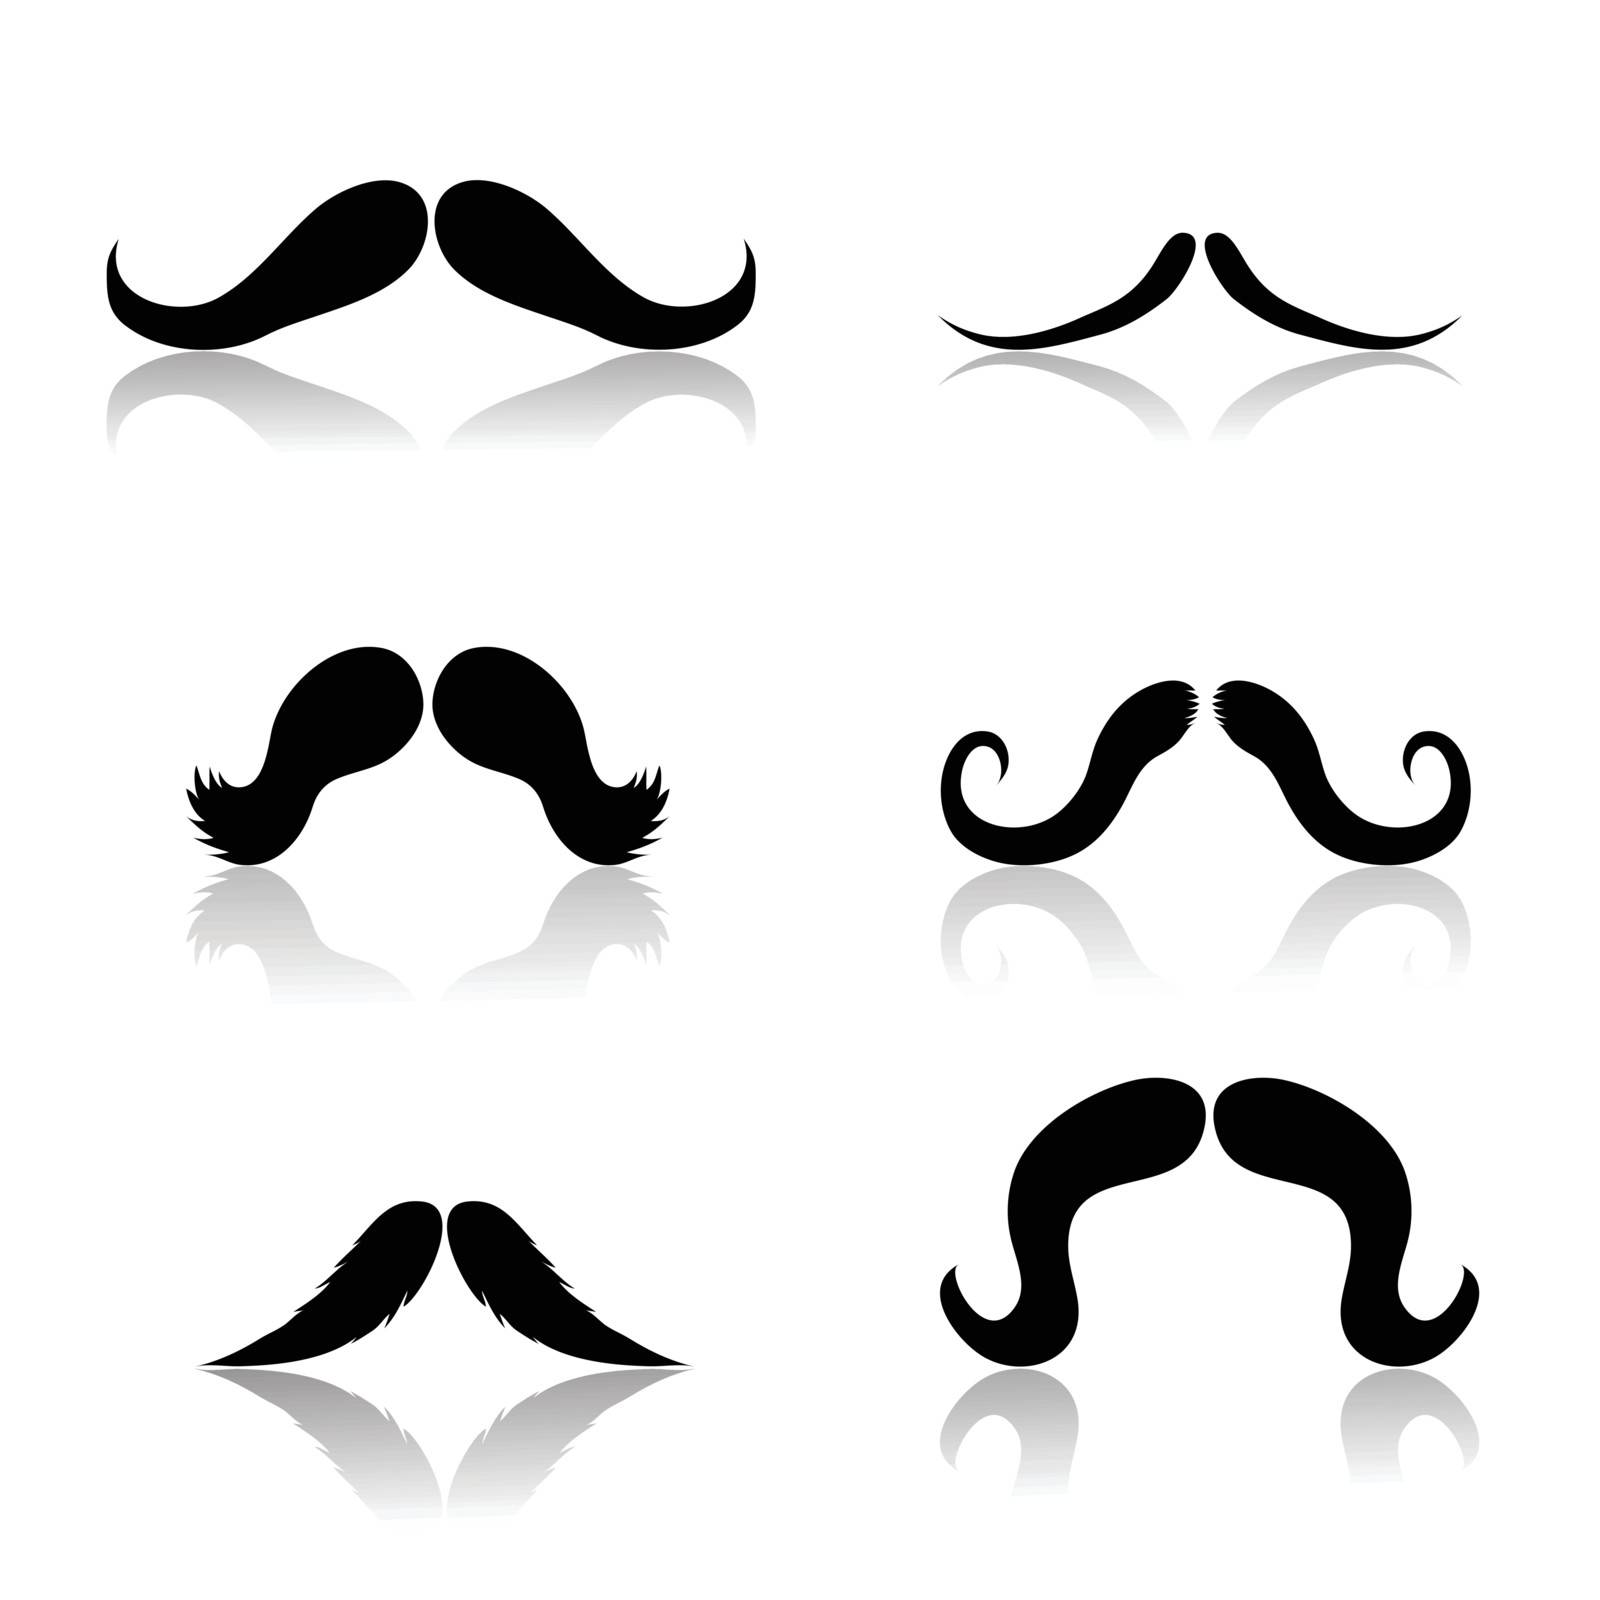  illustration with   mustaches for your design